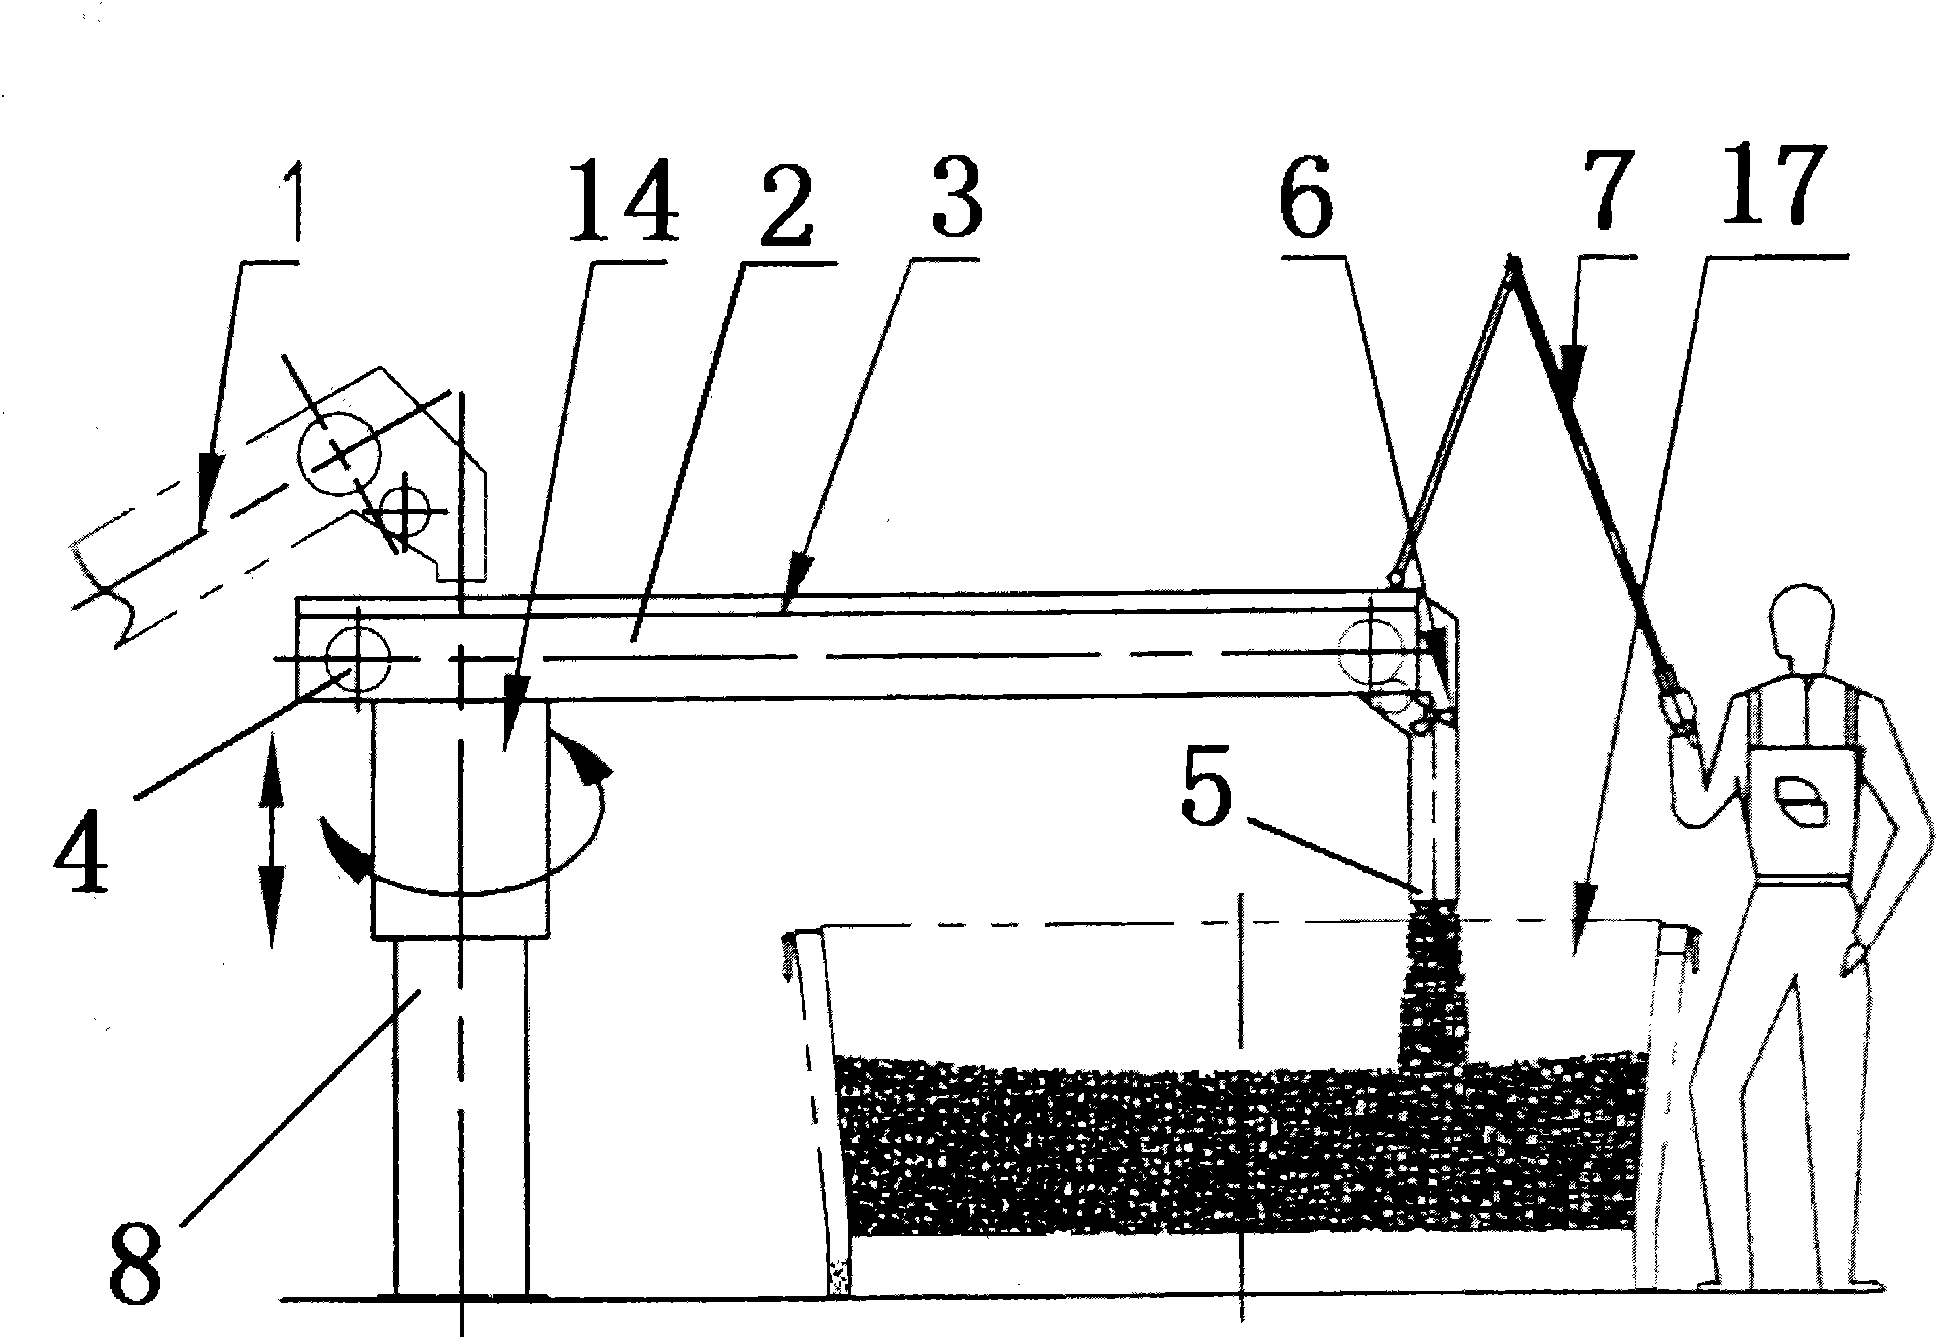 Semi-automatic rice steamer loading device of solid brewing grain tank